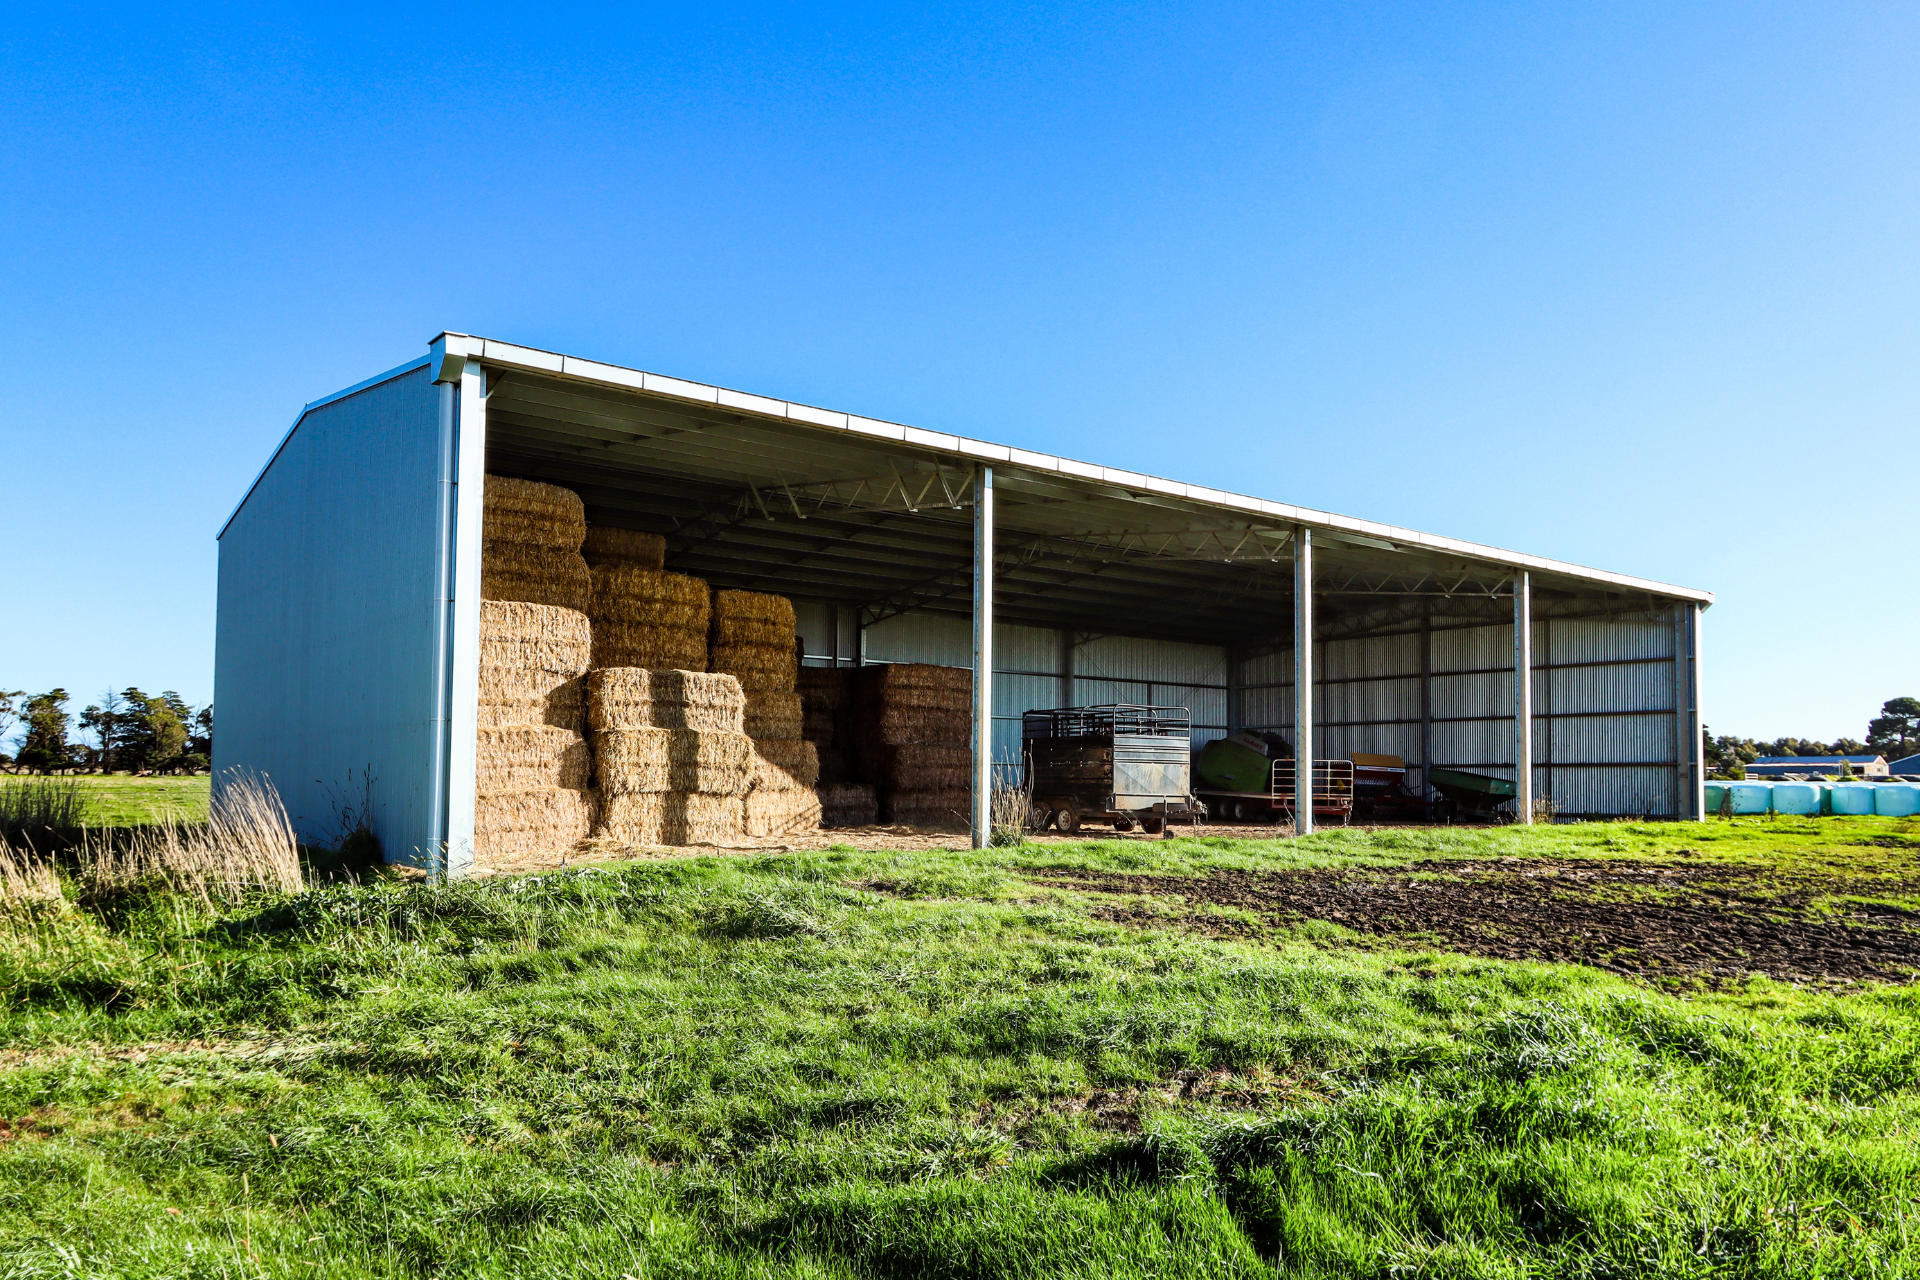 You are currently viewing 32m x 15m x 6m hay shed